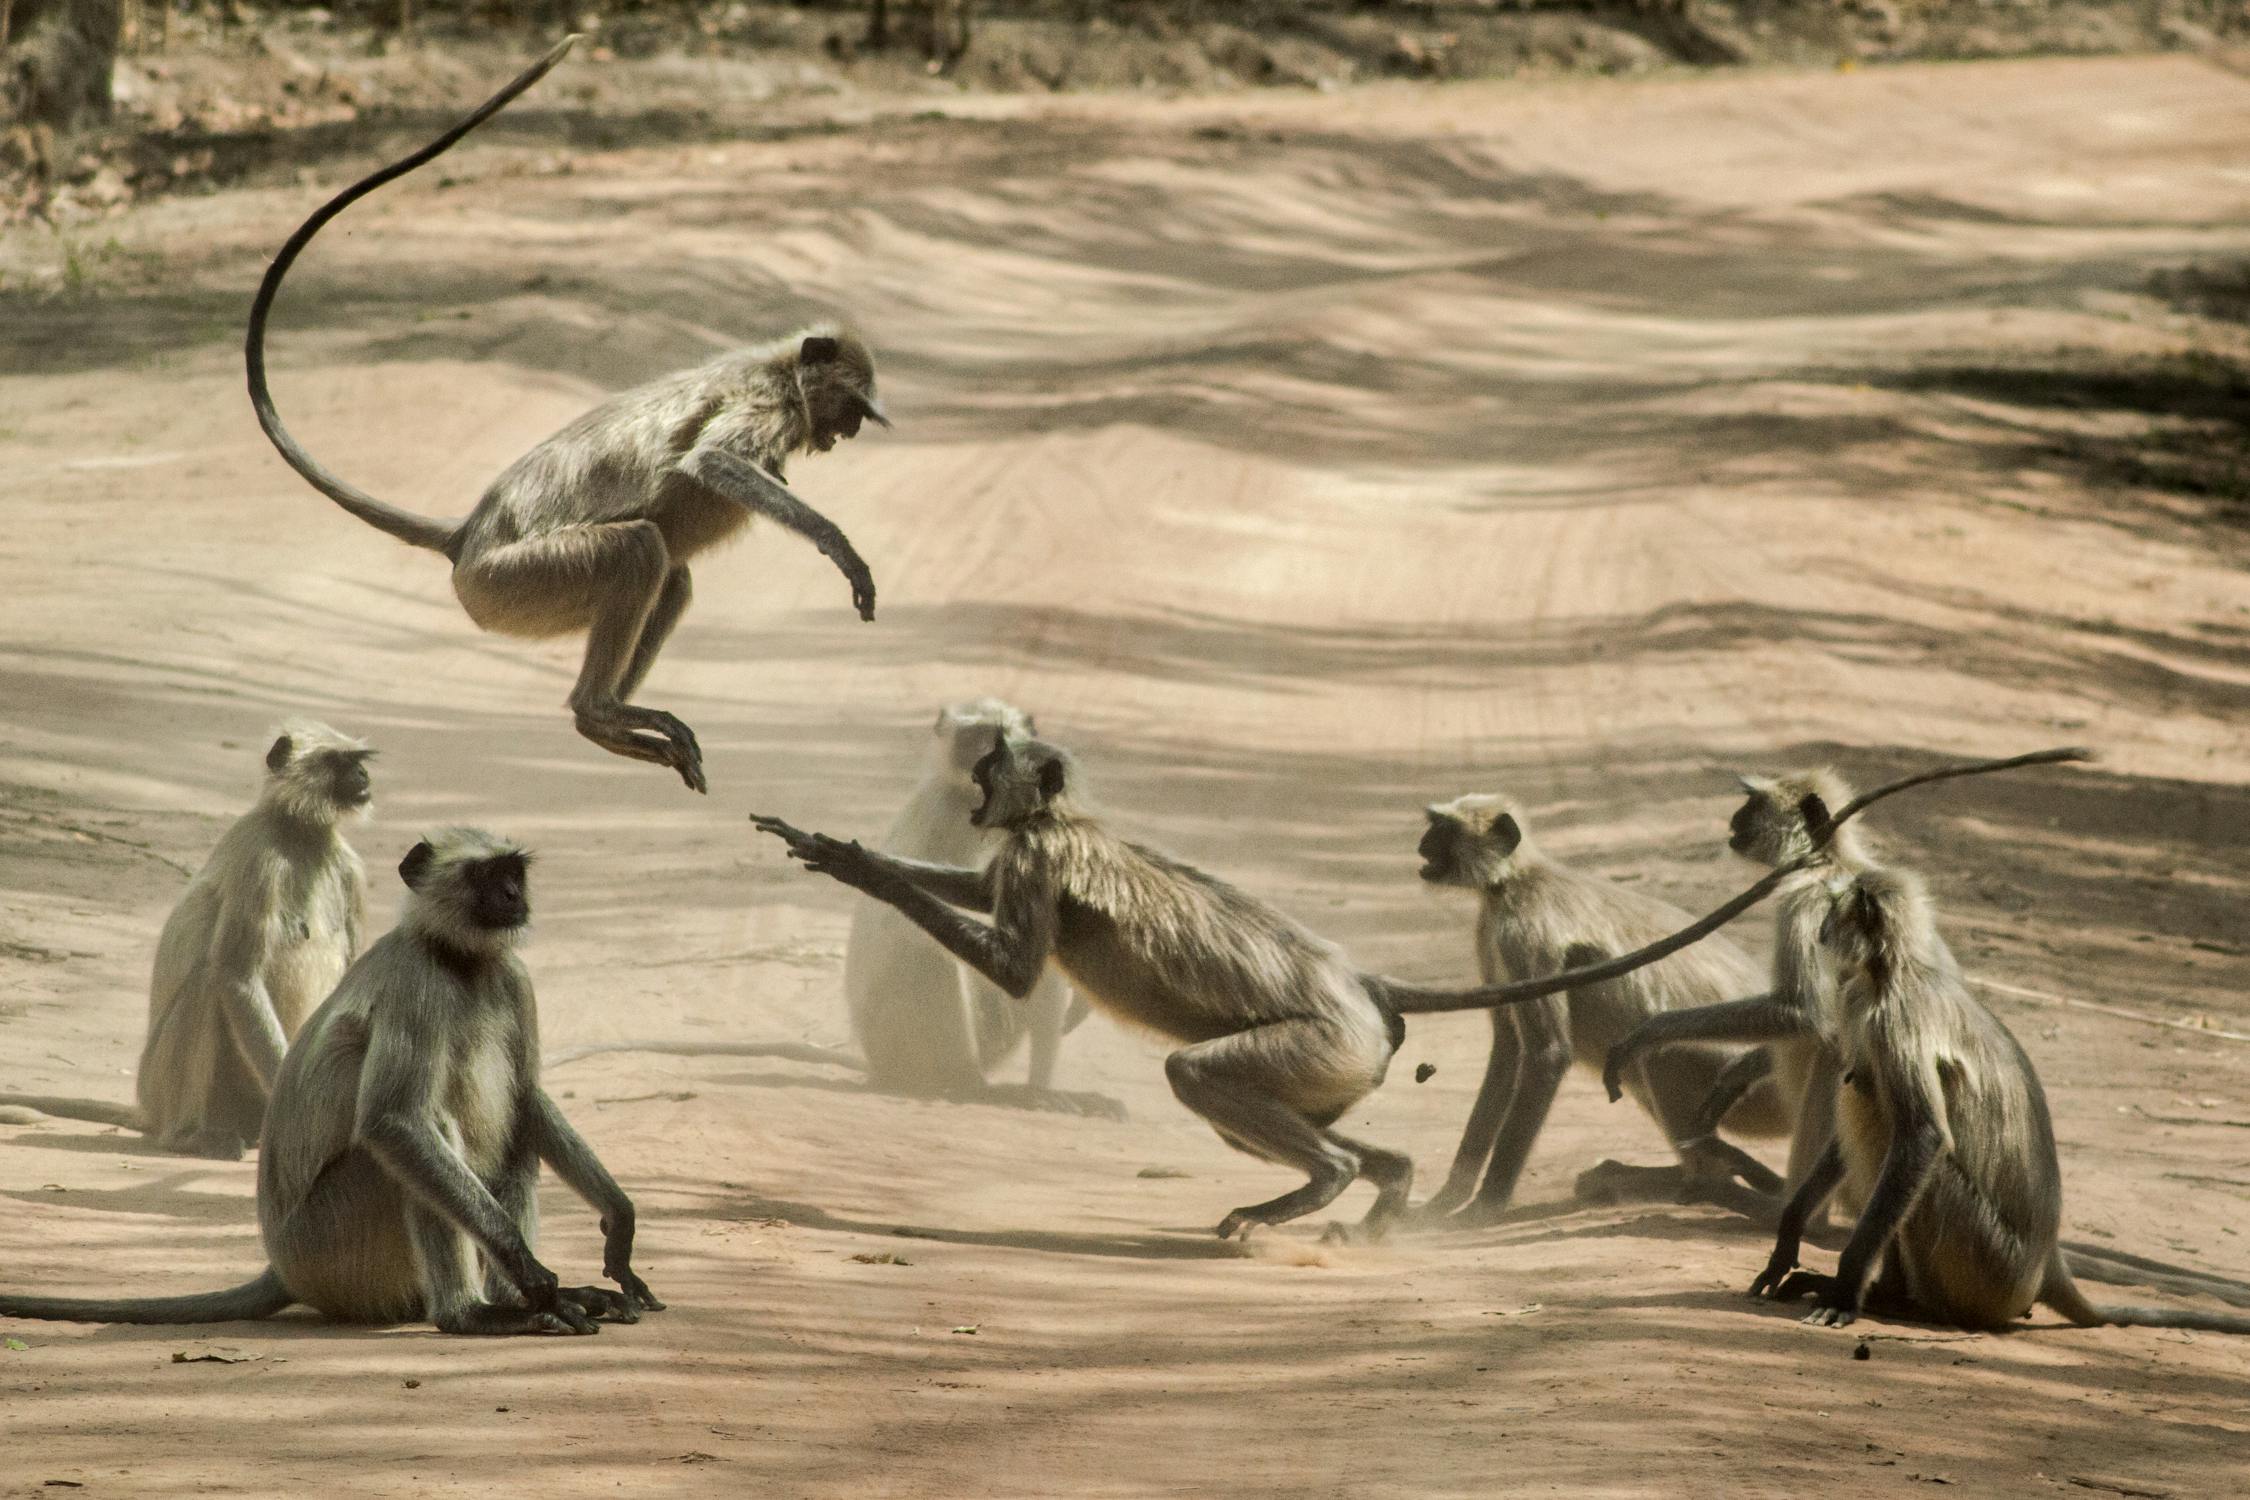 monkeys playing on a dirt road